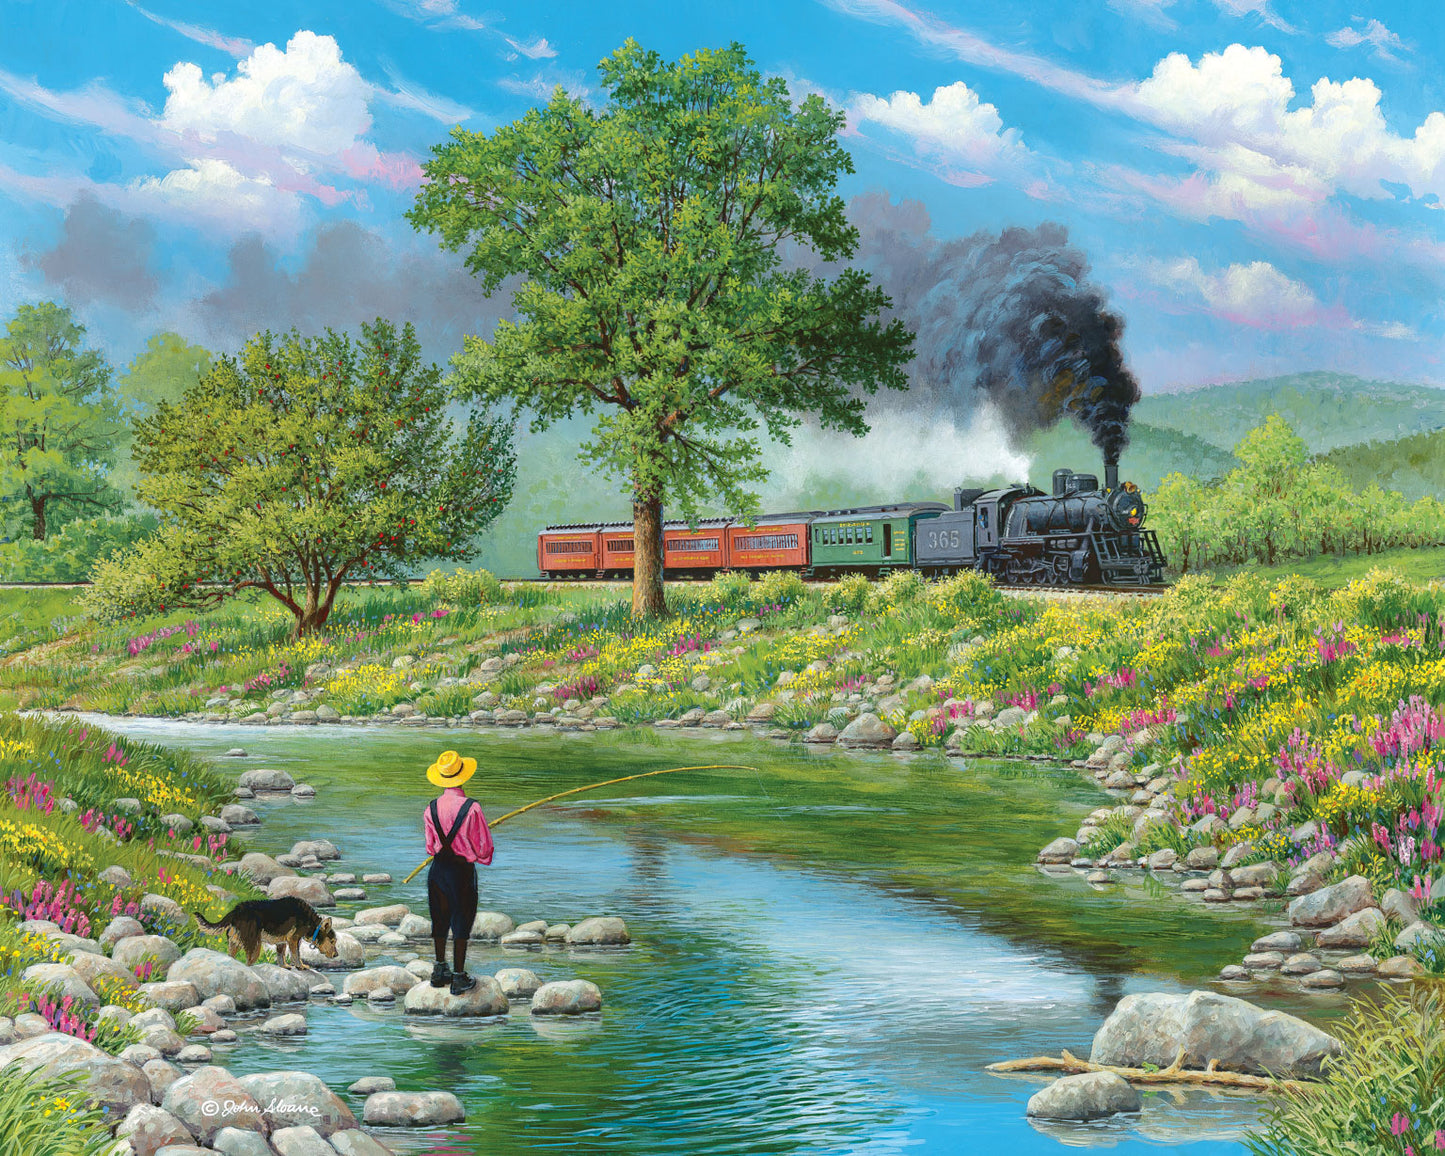 Around the Bend - Puzzle by John Sloane